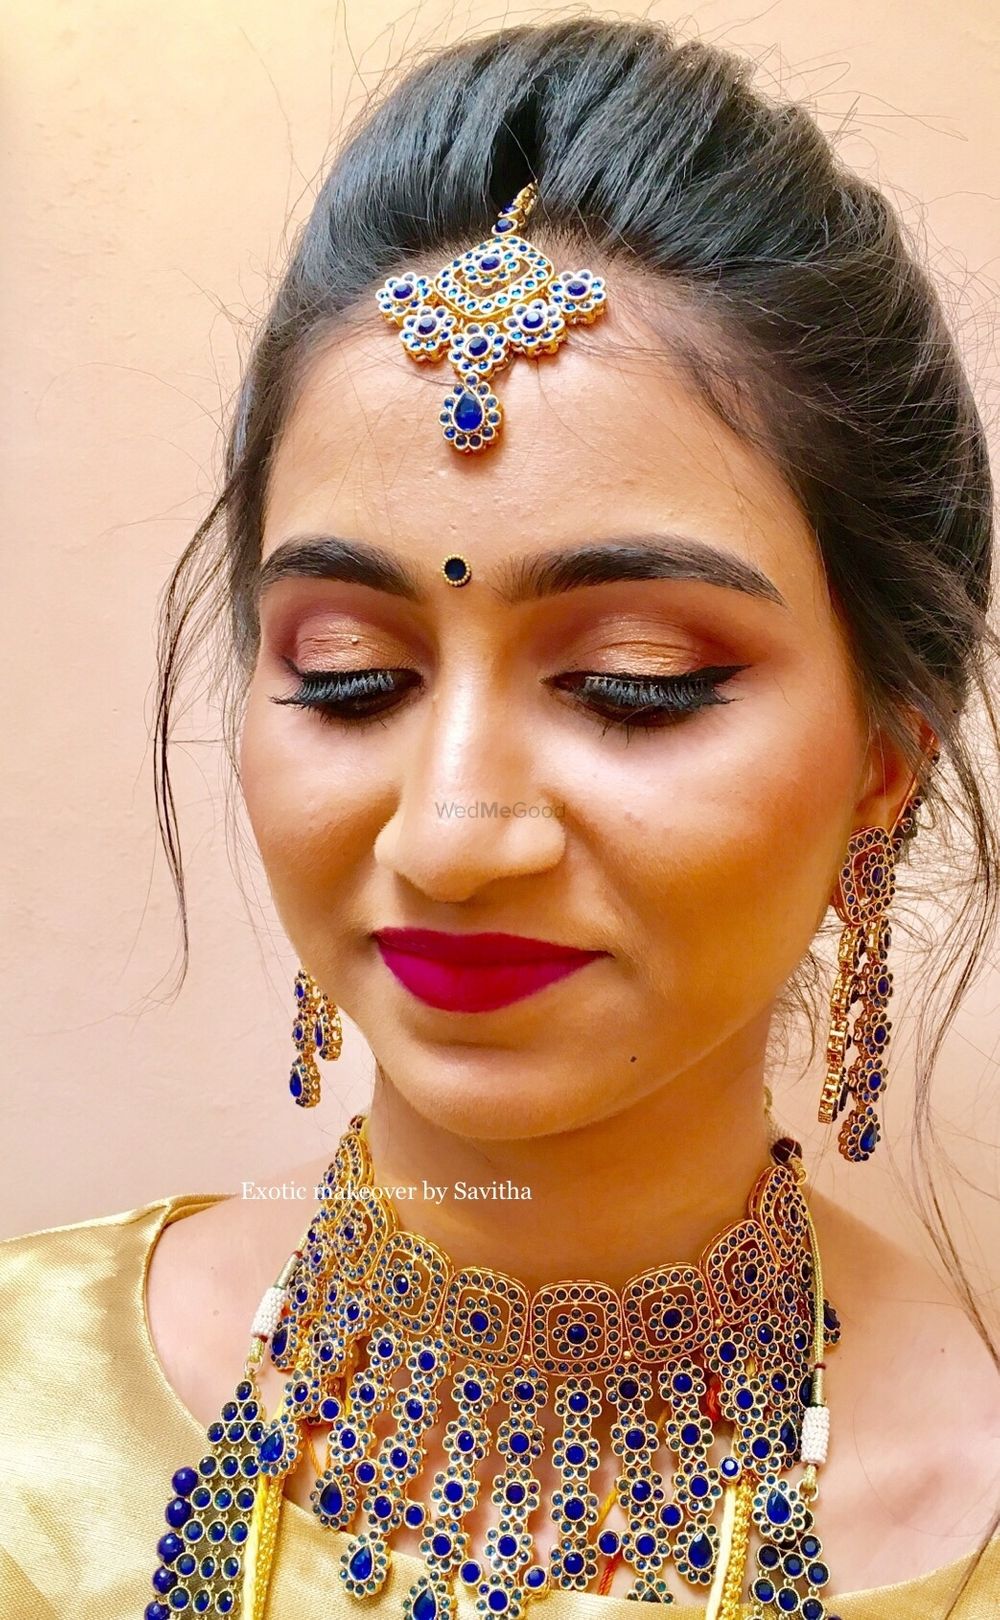 Photo From Brides-2020 - By Exotic makeover by Savitha 